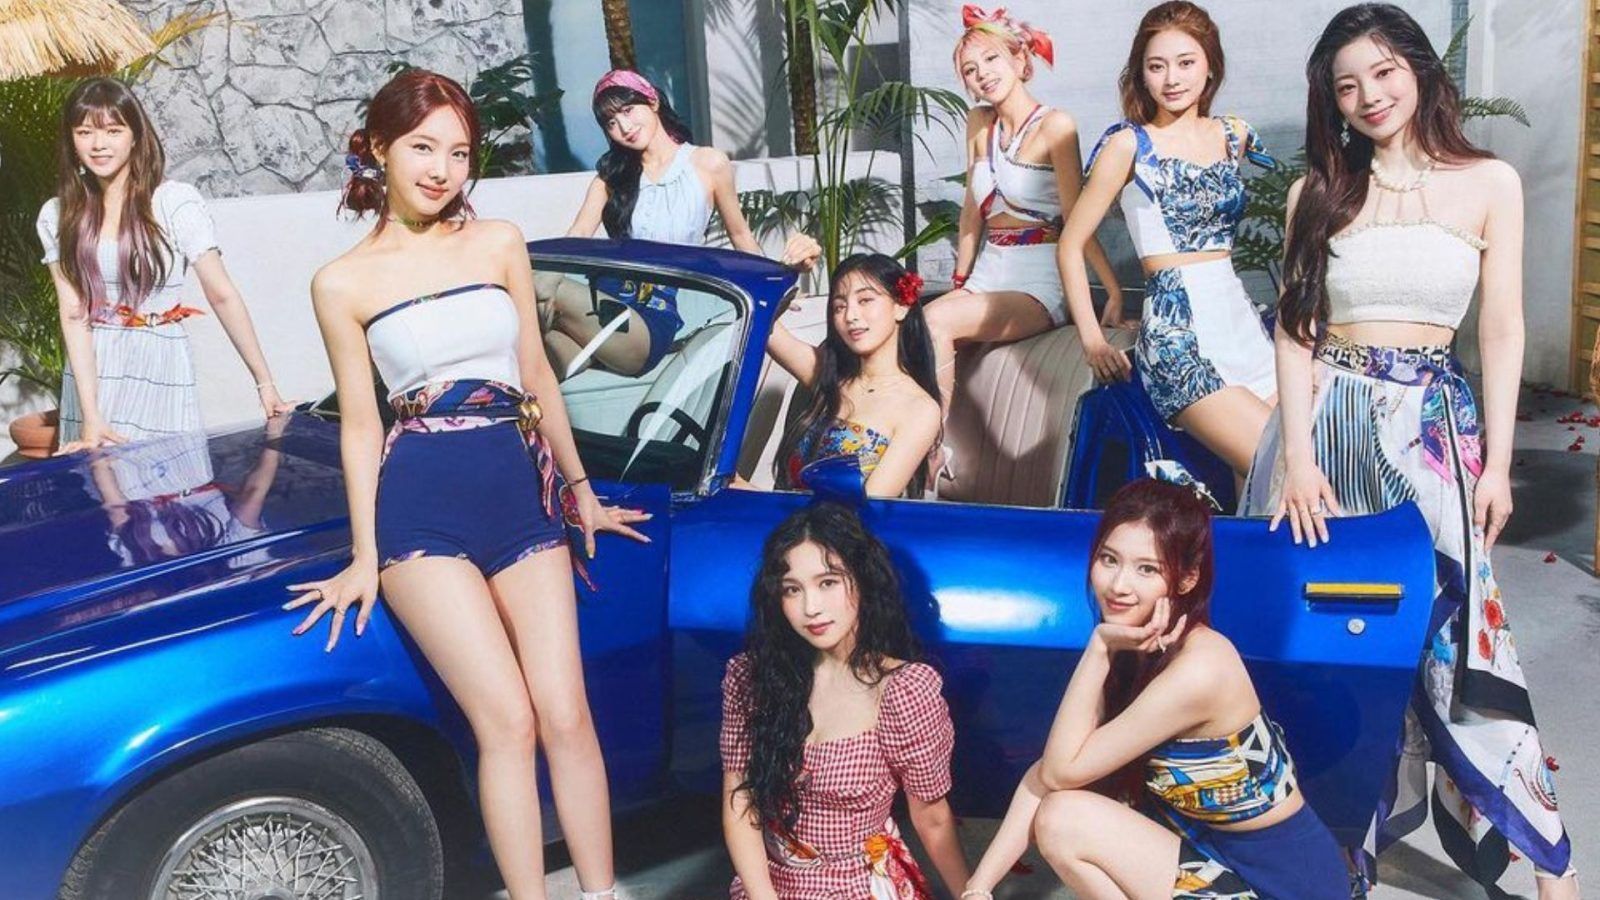 TWICE members net worth, earnings, brand endorsements, and more